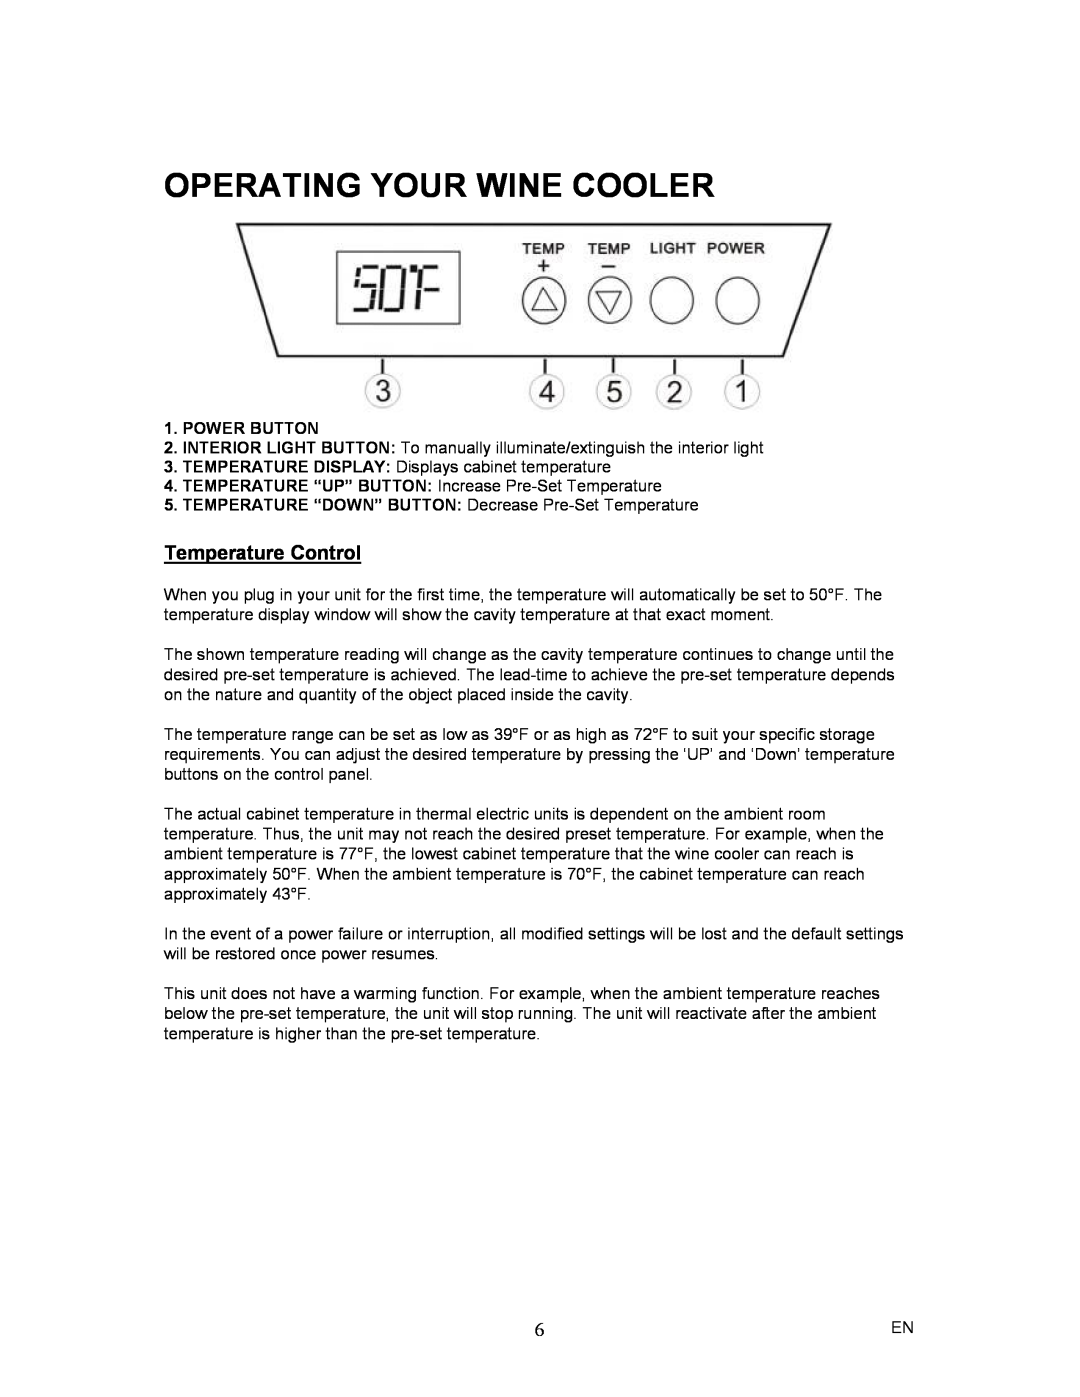 Magic Chef MCWC12SV instruction manual Operating Your Wine Cooler, Temperature Control, Power Button 